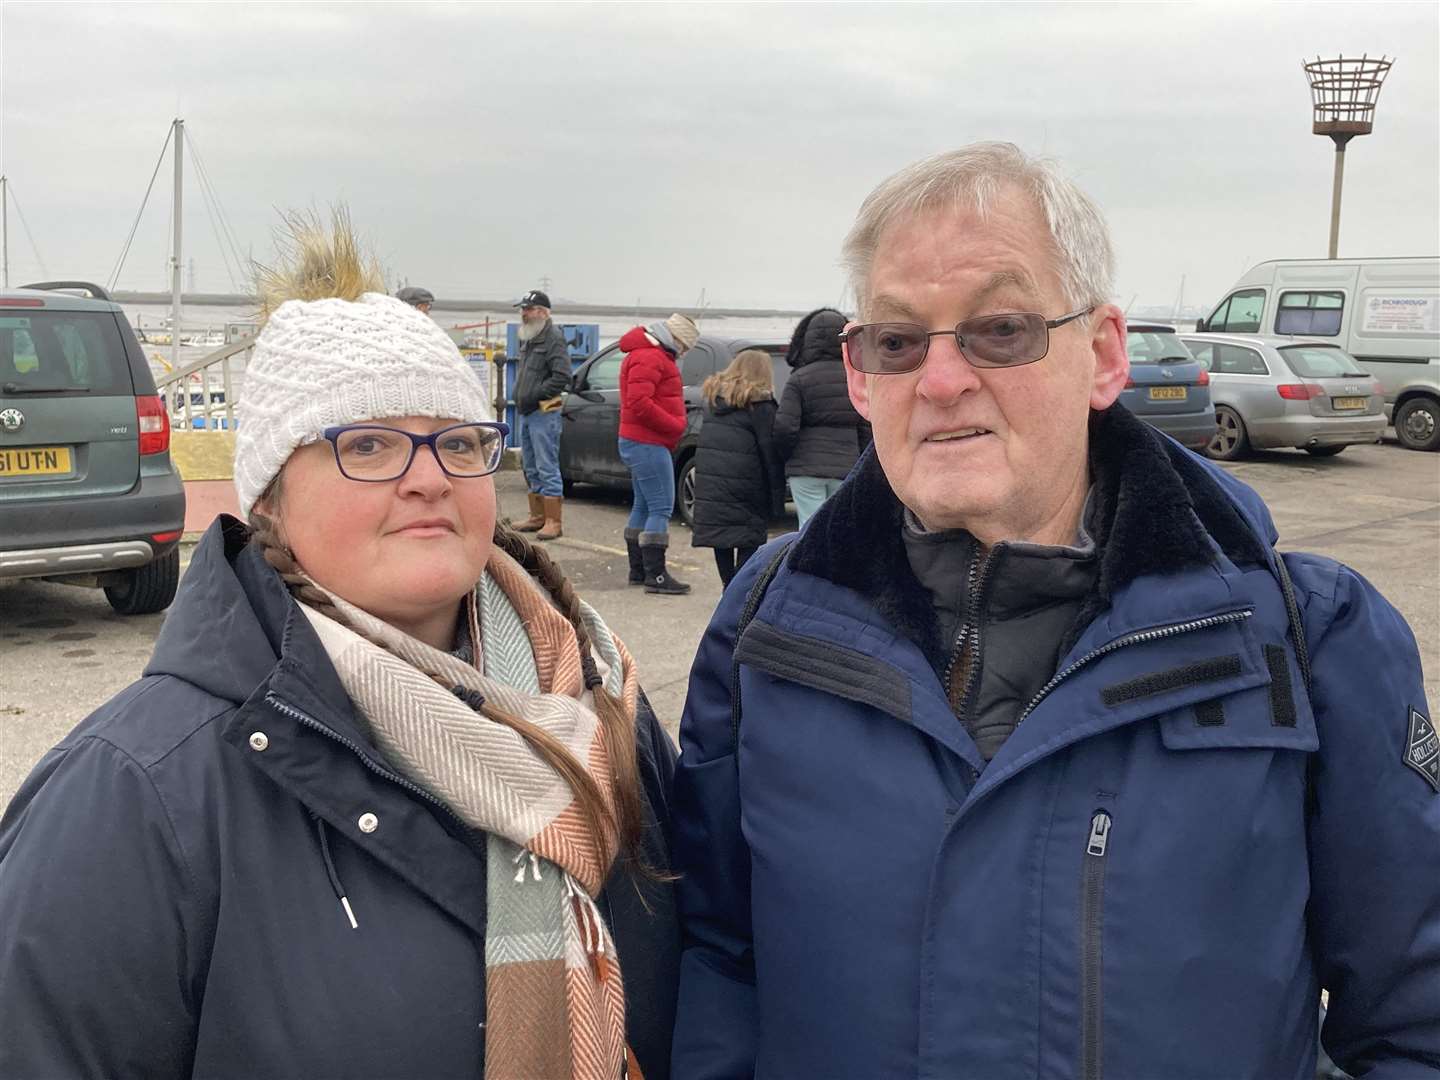 Former Sheppey United FC winger Steve 'Trigger' Hunn, 69, and his daughter Zena Gooding, 46, about to board the X-Pilot at Queenborough to see the masts of Sheppey bomb ship the SS Richard Montgomery